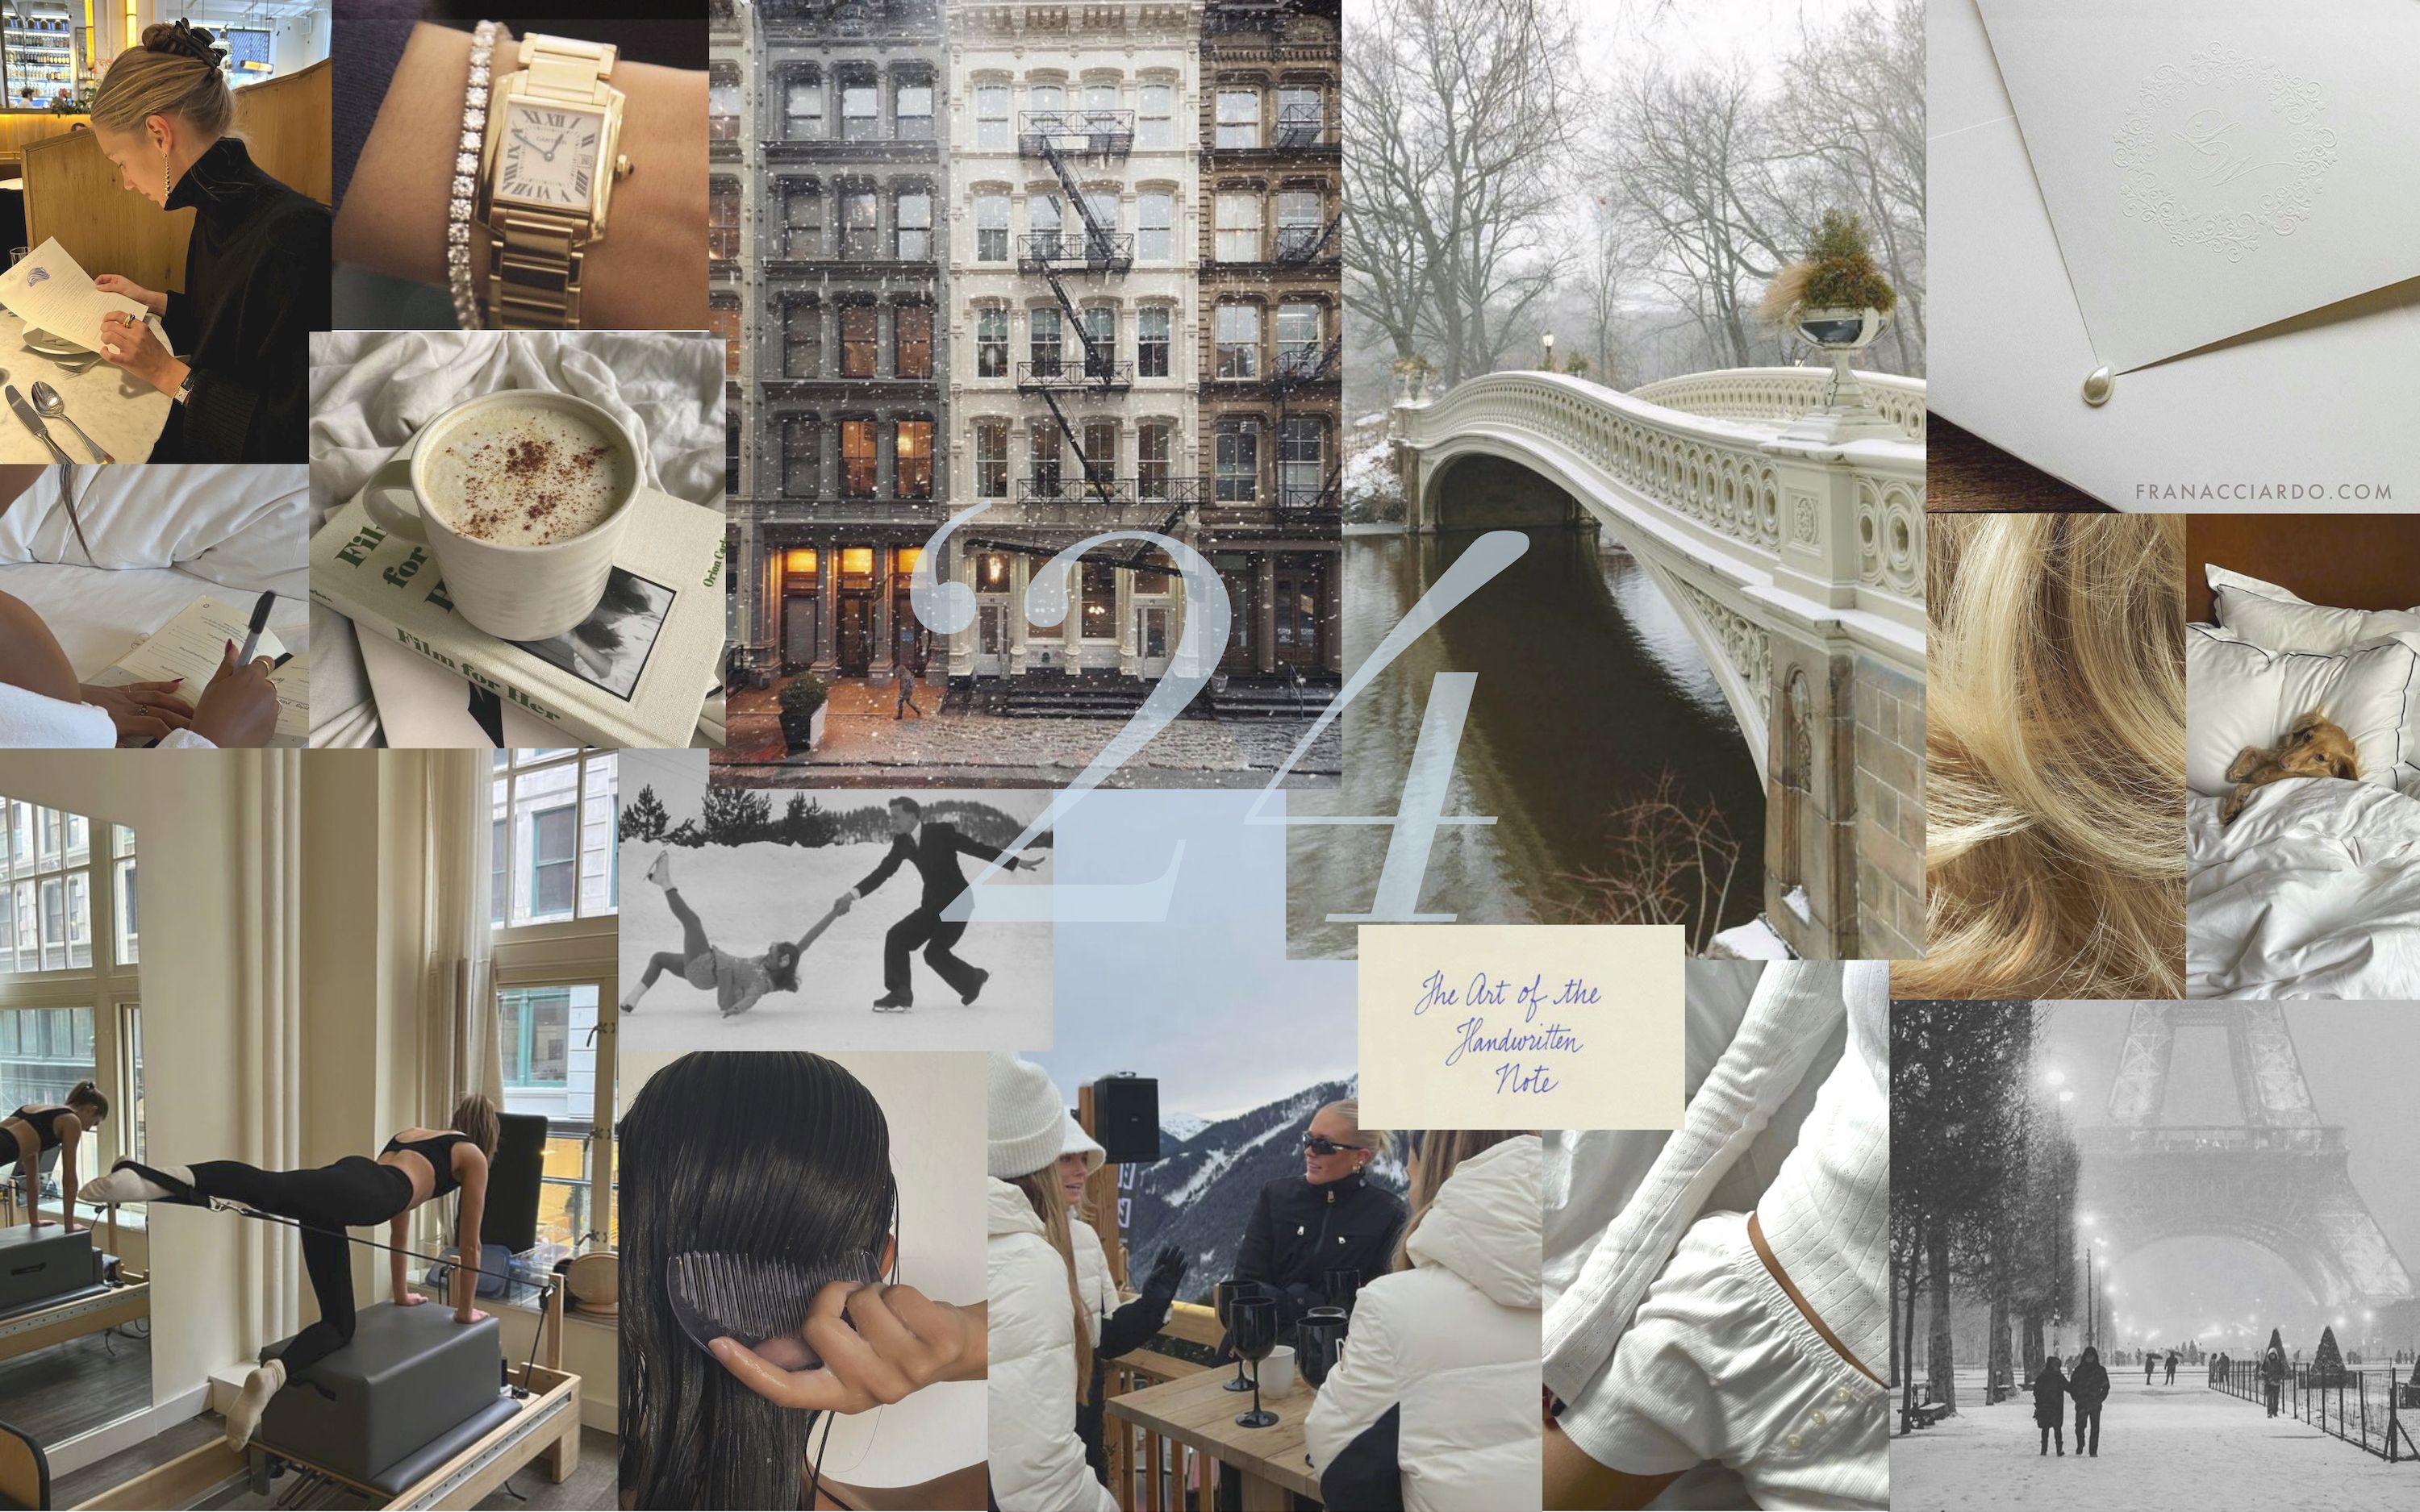 A collage of images from the blog post, including a cup of coffee, a cityscape, a bridge, a snowy street, and people in a gym. - Desktop, feathers, Taylor Swift, January, winter